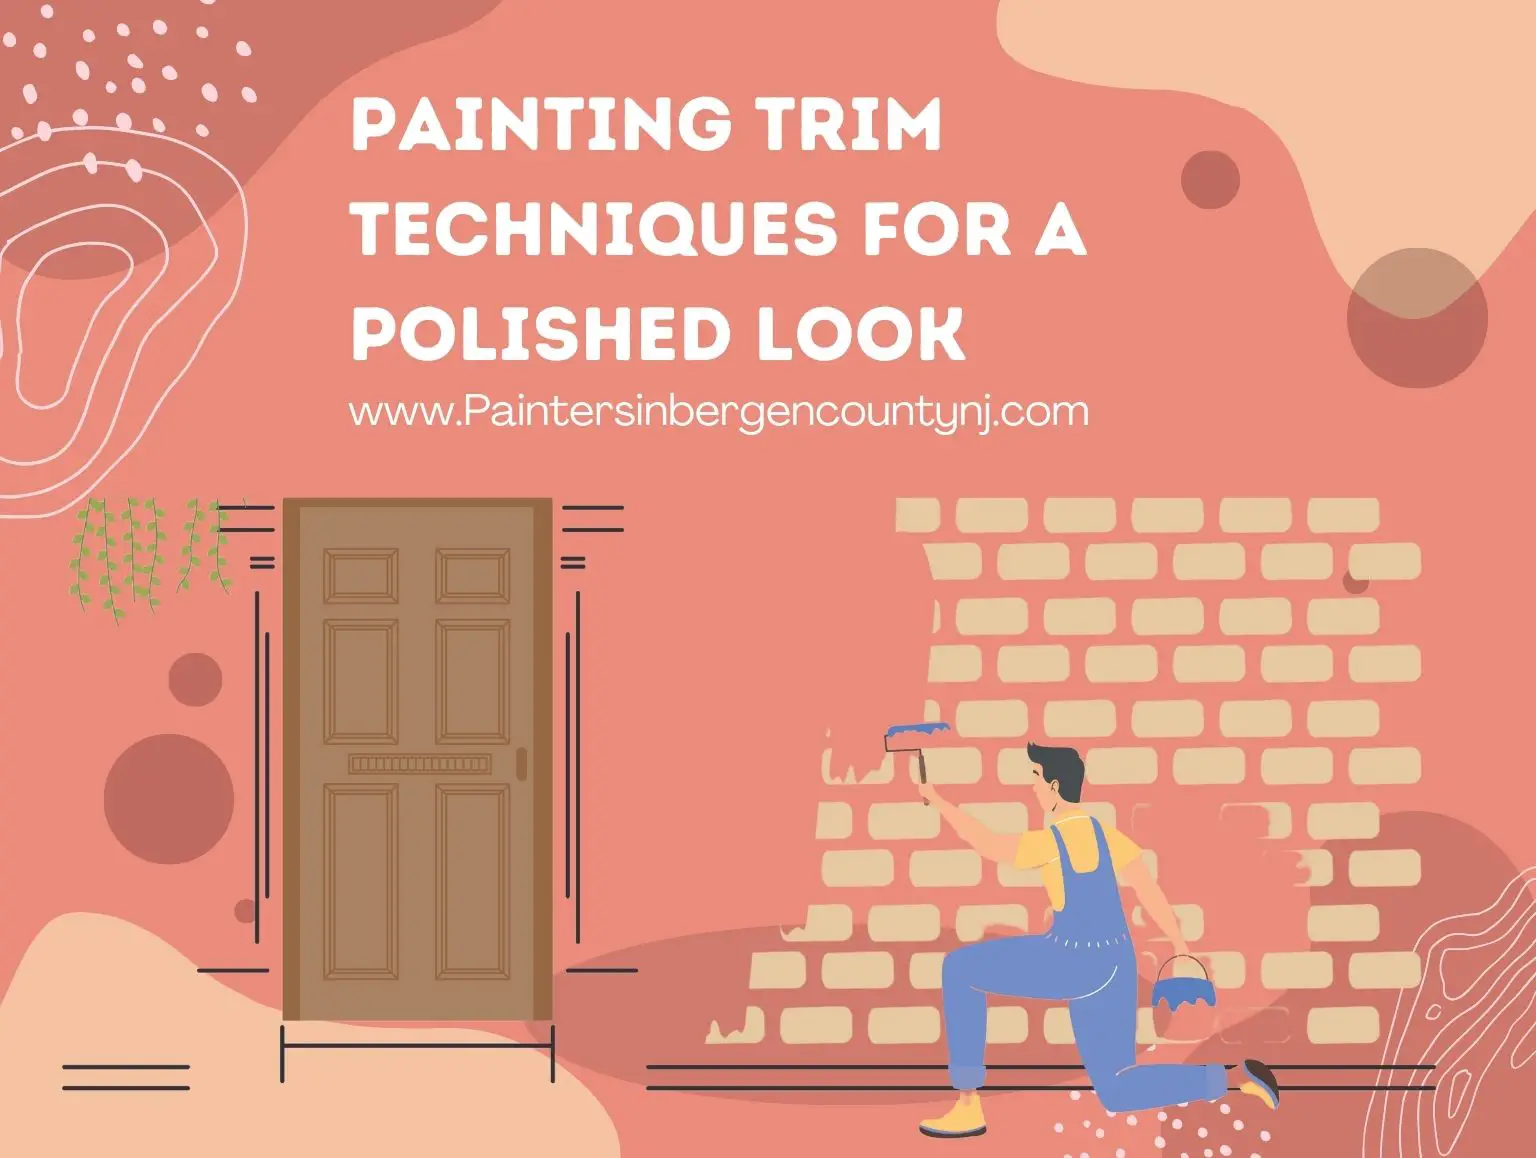 Painting Trim Techniques for a Polished Look